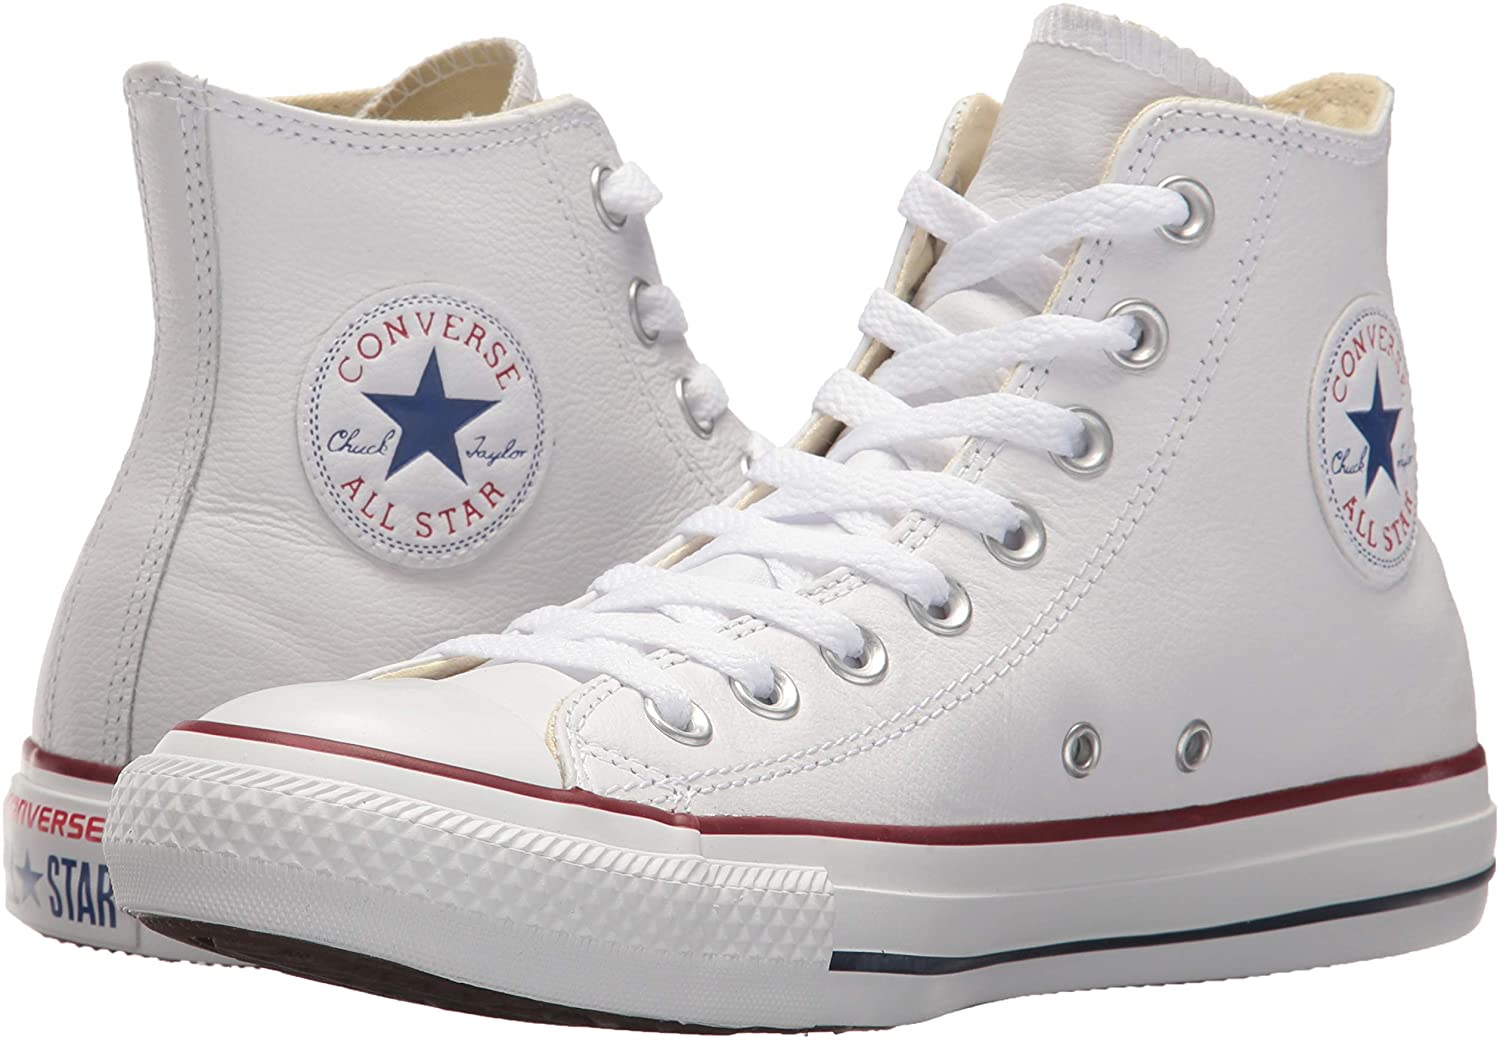 Converse Men's Chuck Taylor All Star Leather Hi Top Sneakers | eBay